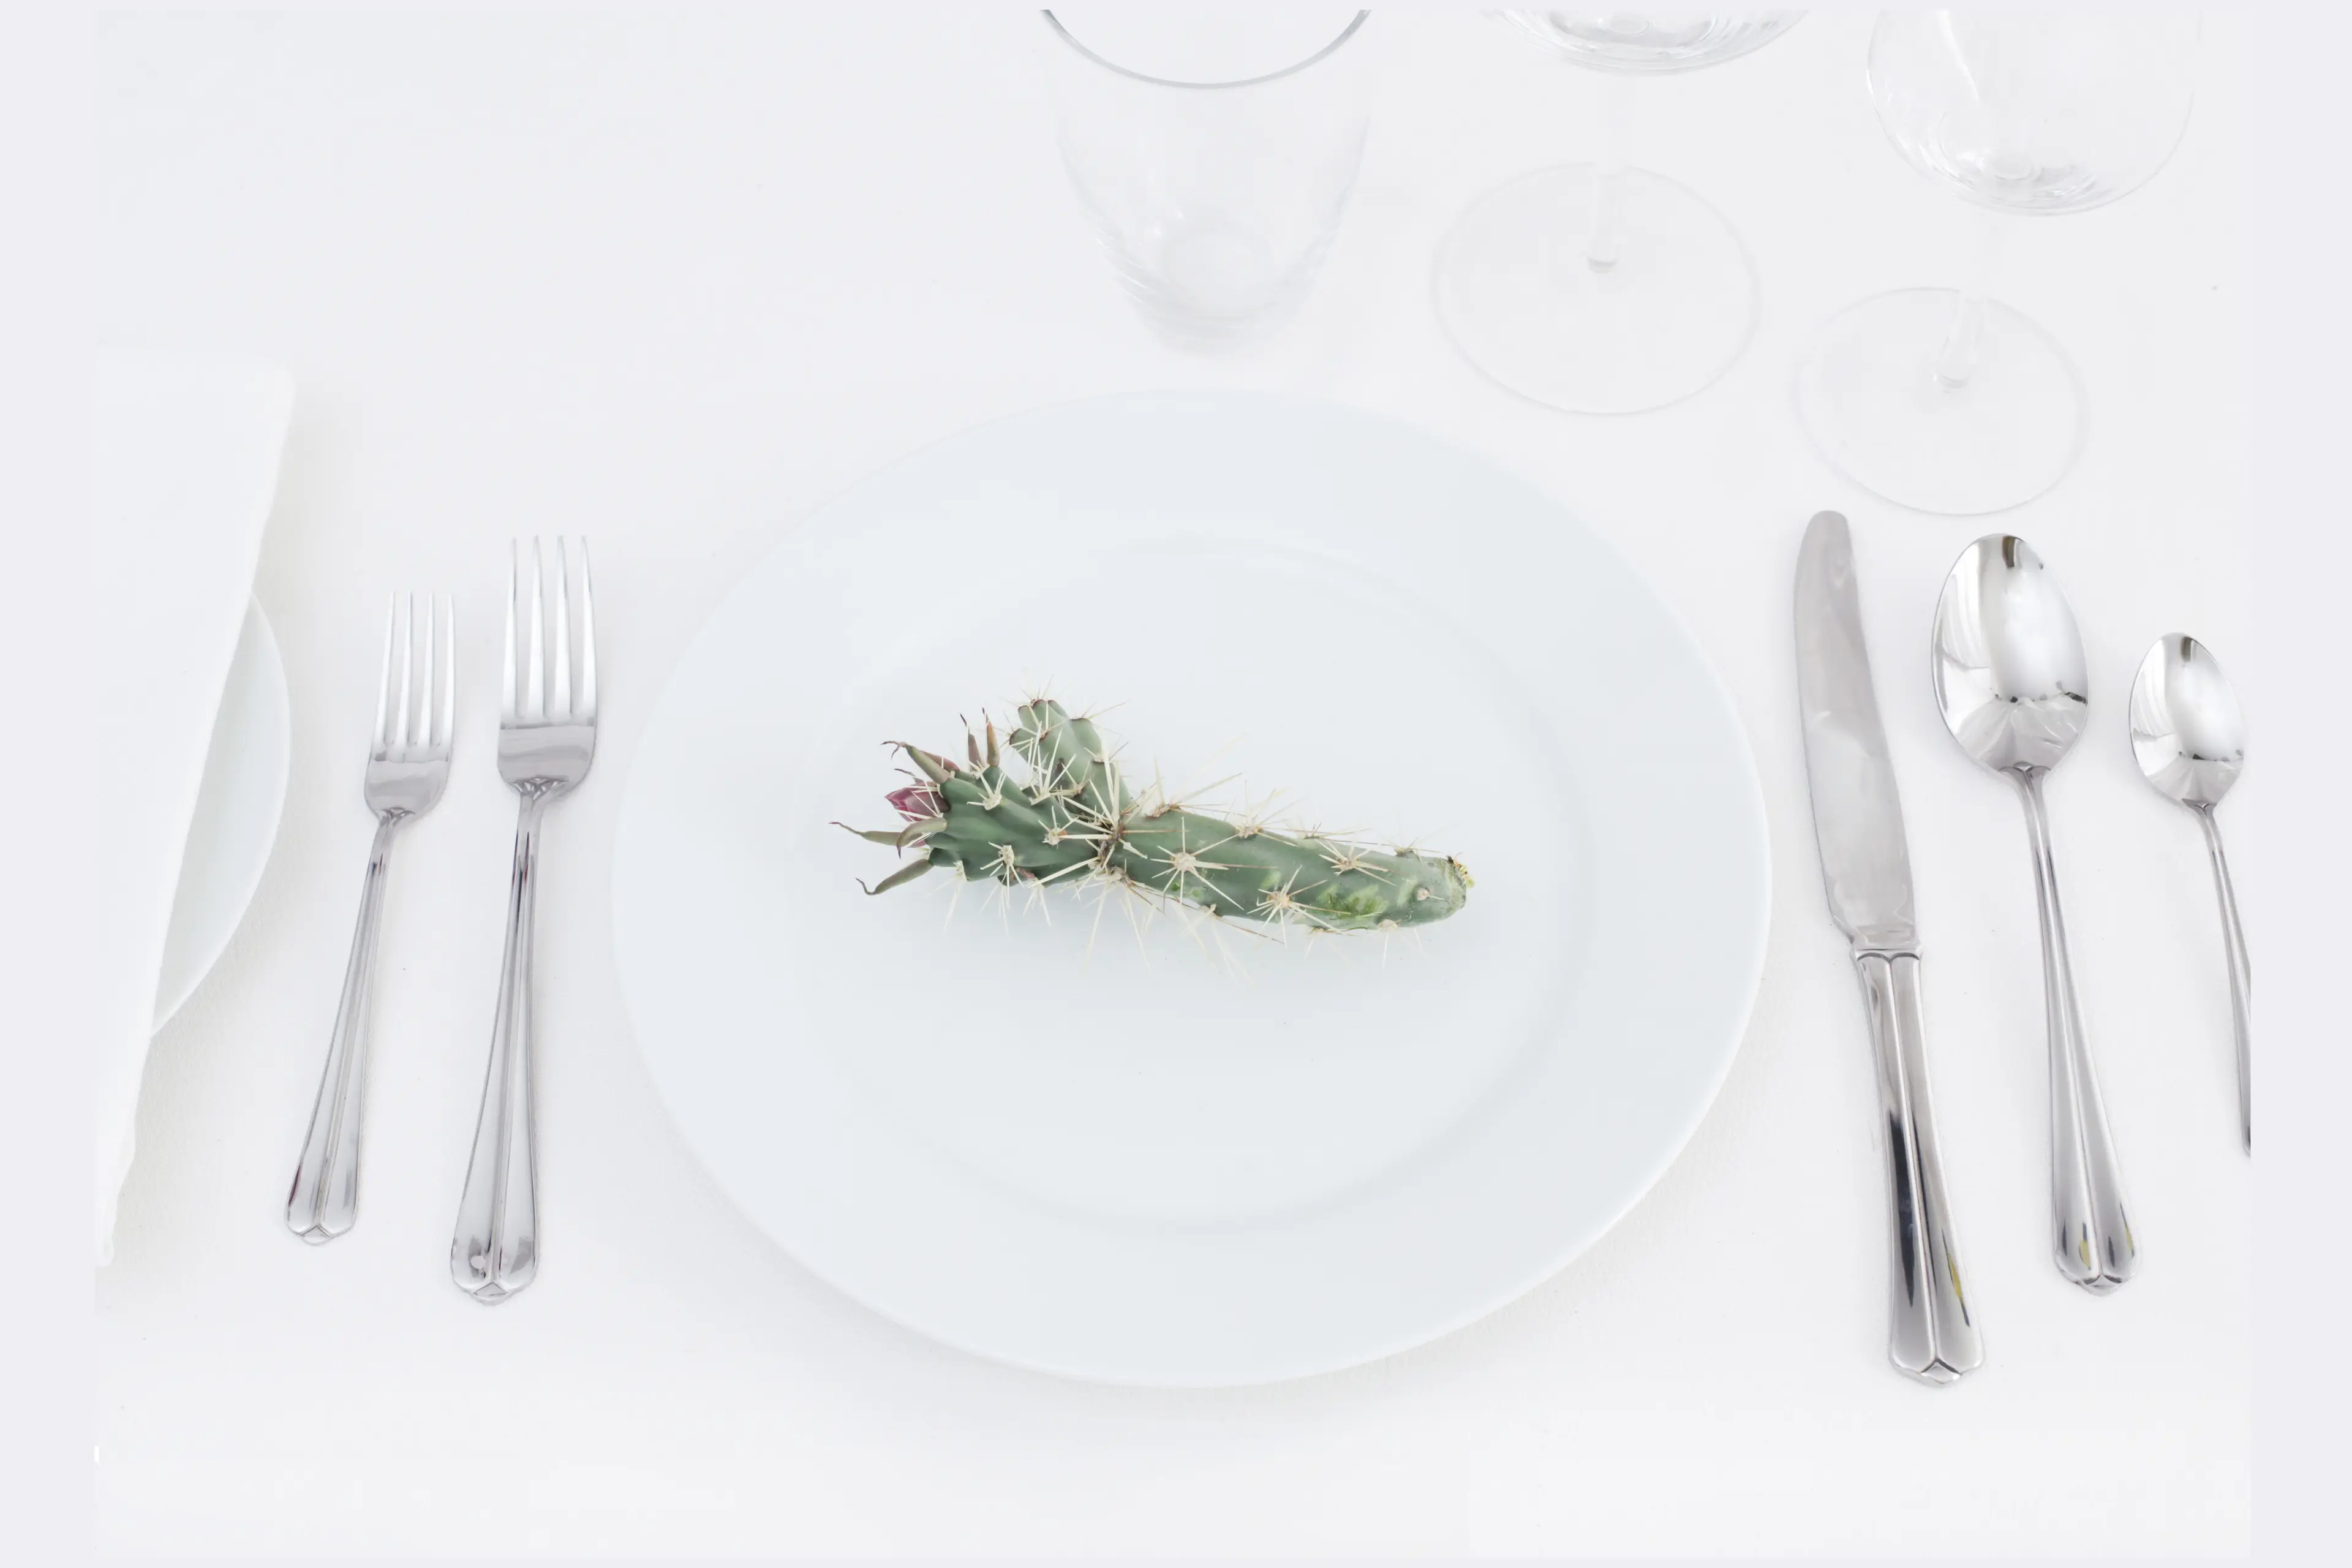 Photo of white plate on white table cloth with two forks on the left and a knife and two spoons on the right.  A small green cactus with pricks sits on the plate